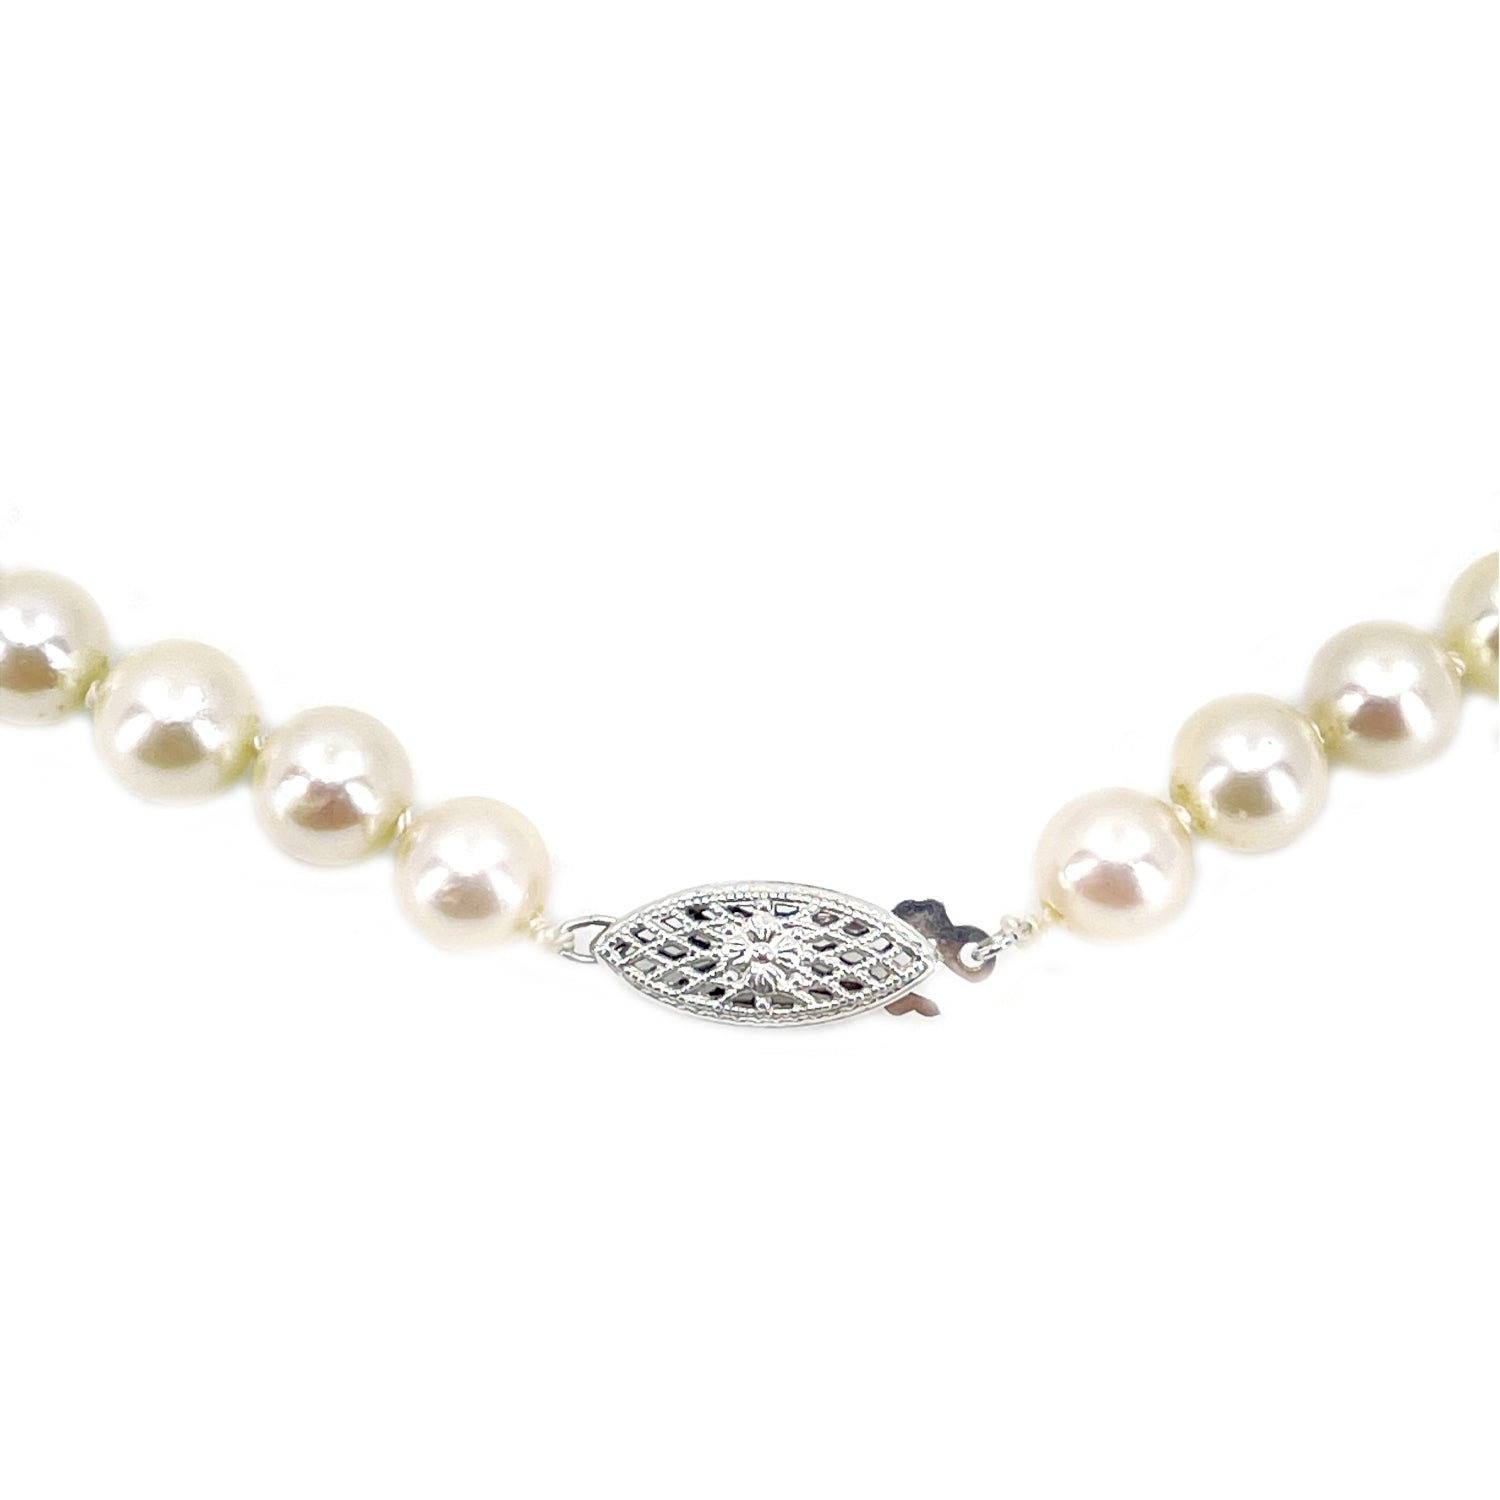 Vintage Green Jade Japanese Saltwater Cultured Akoya Pearl Choker Necklace- 14K White Gold 17.25 Inch